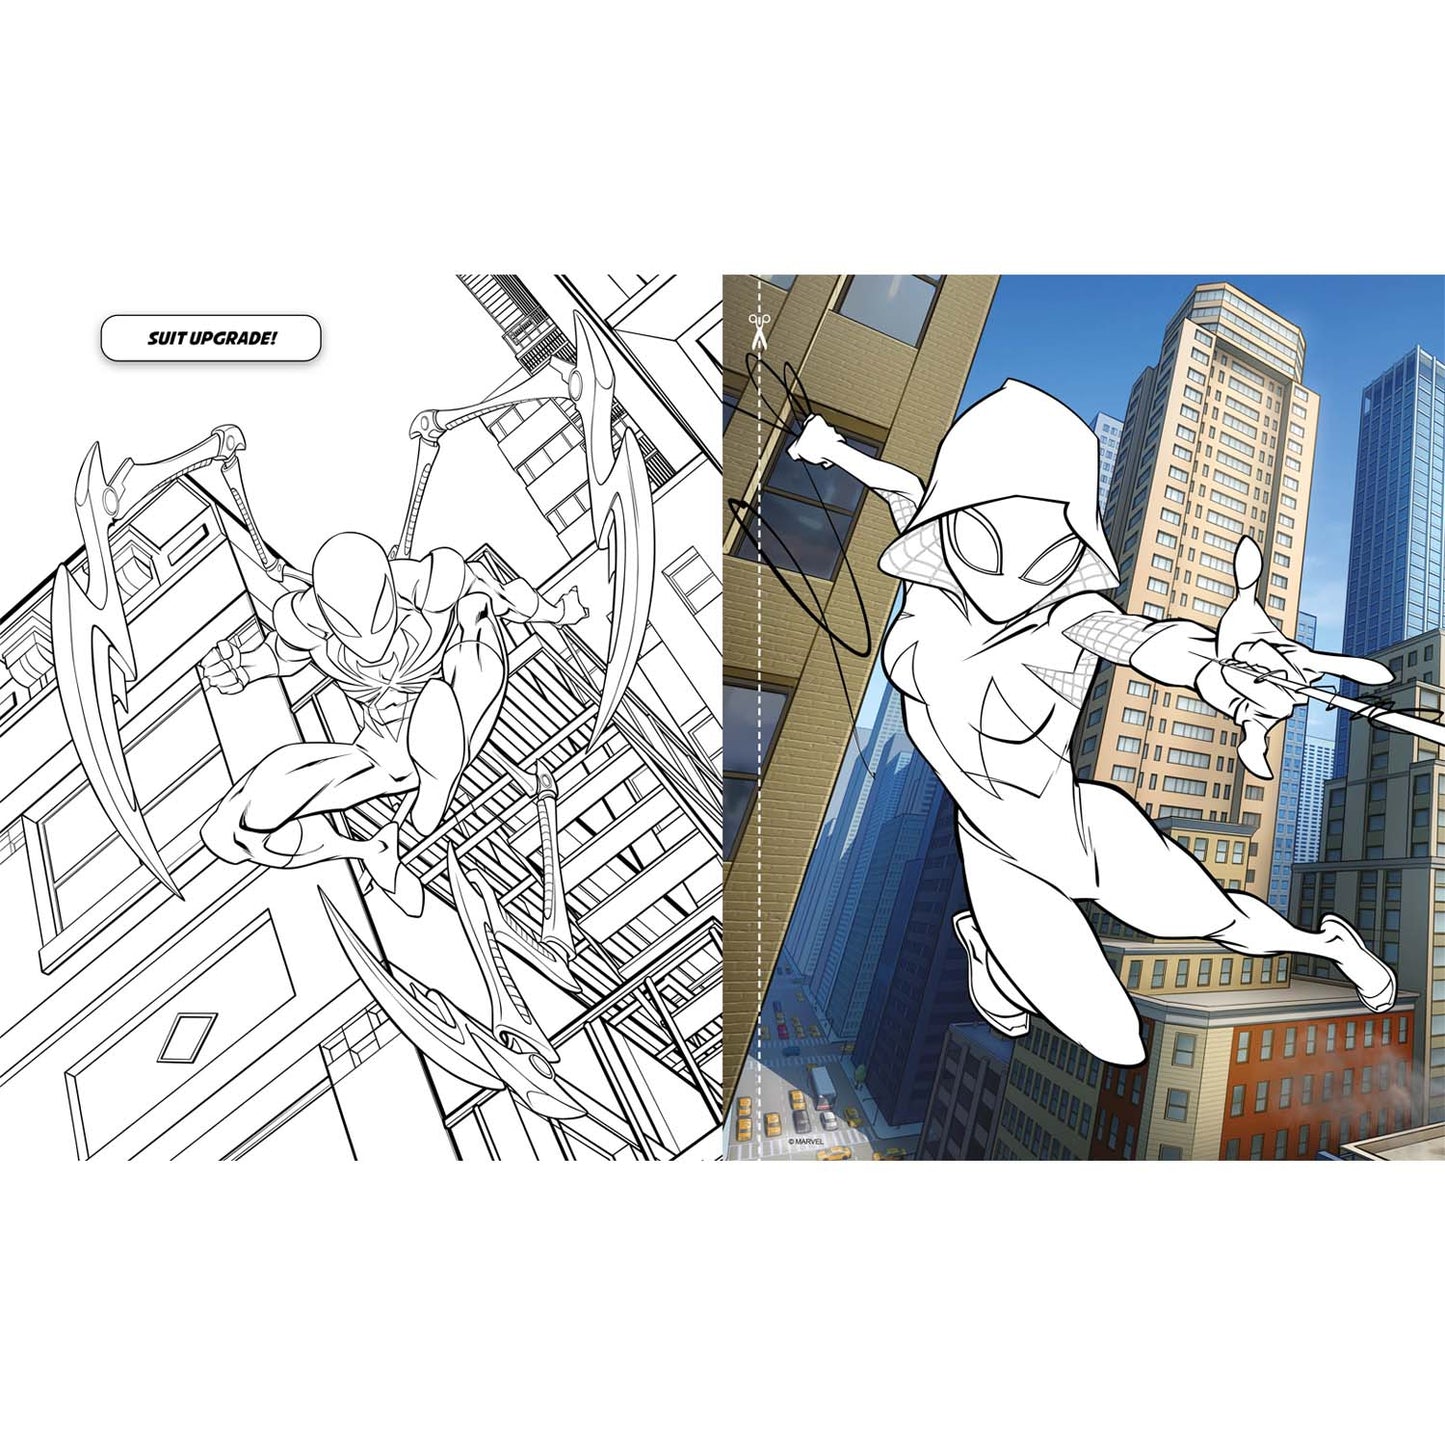 Marvel Spider-Man: 3-in-1 Colouring